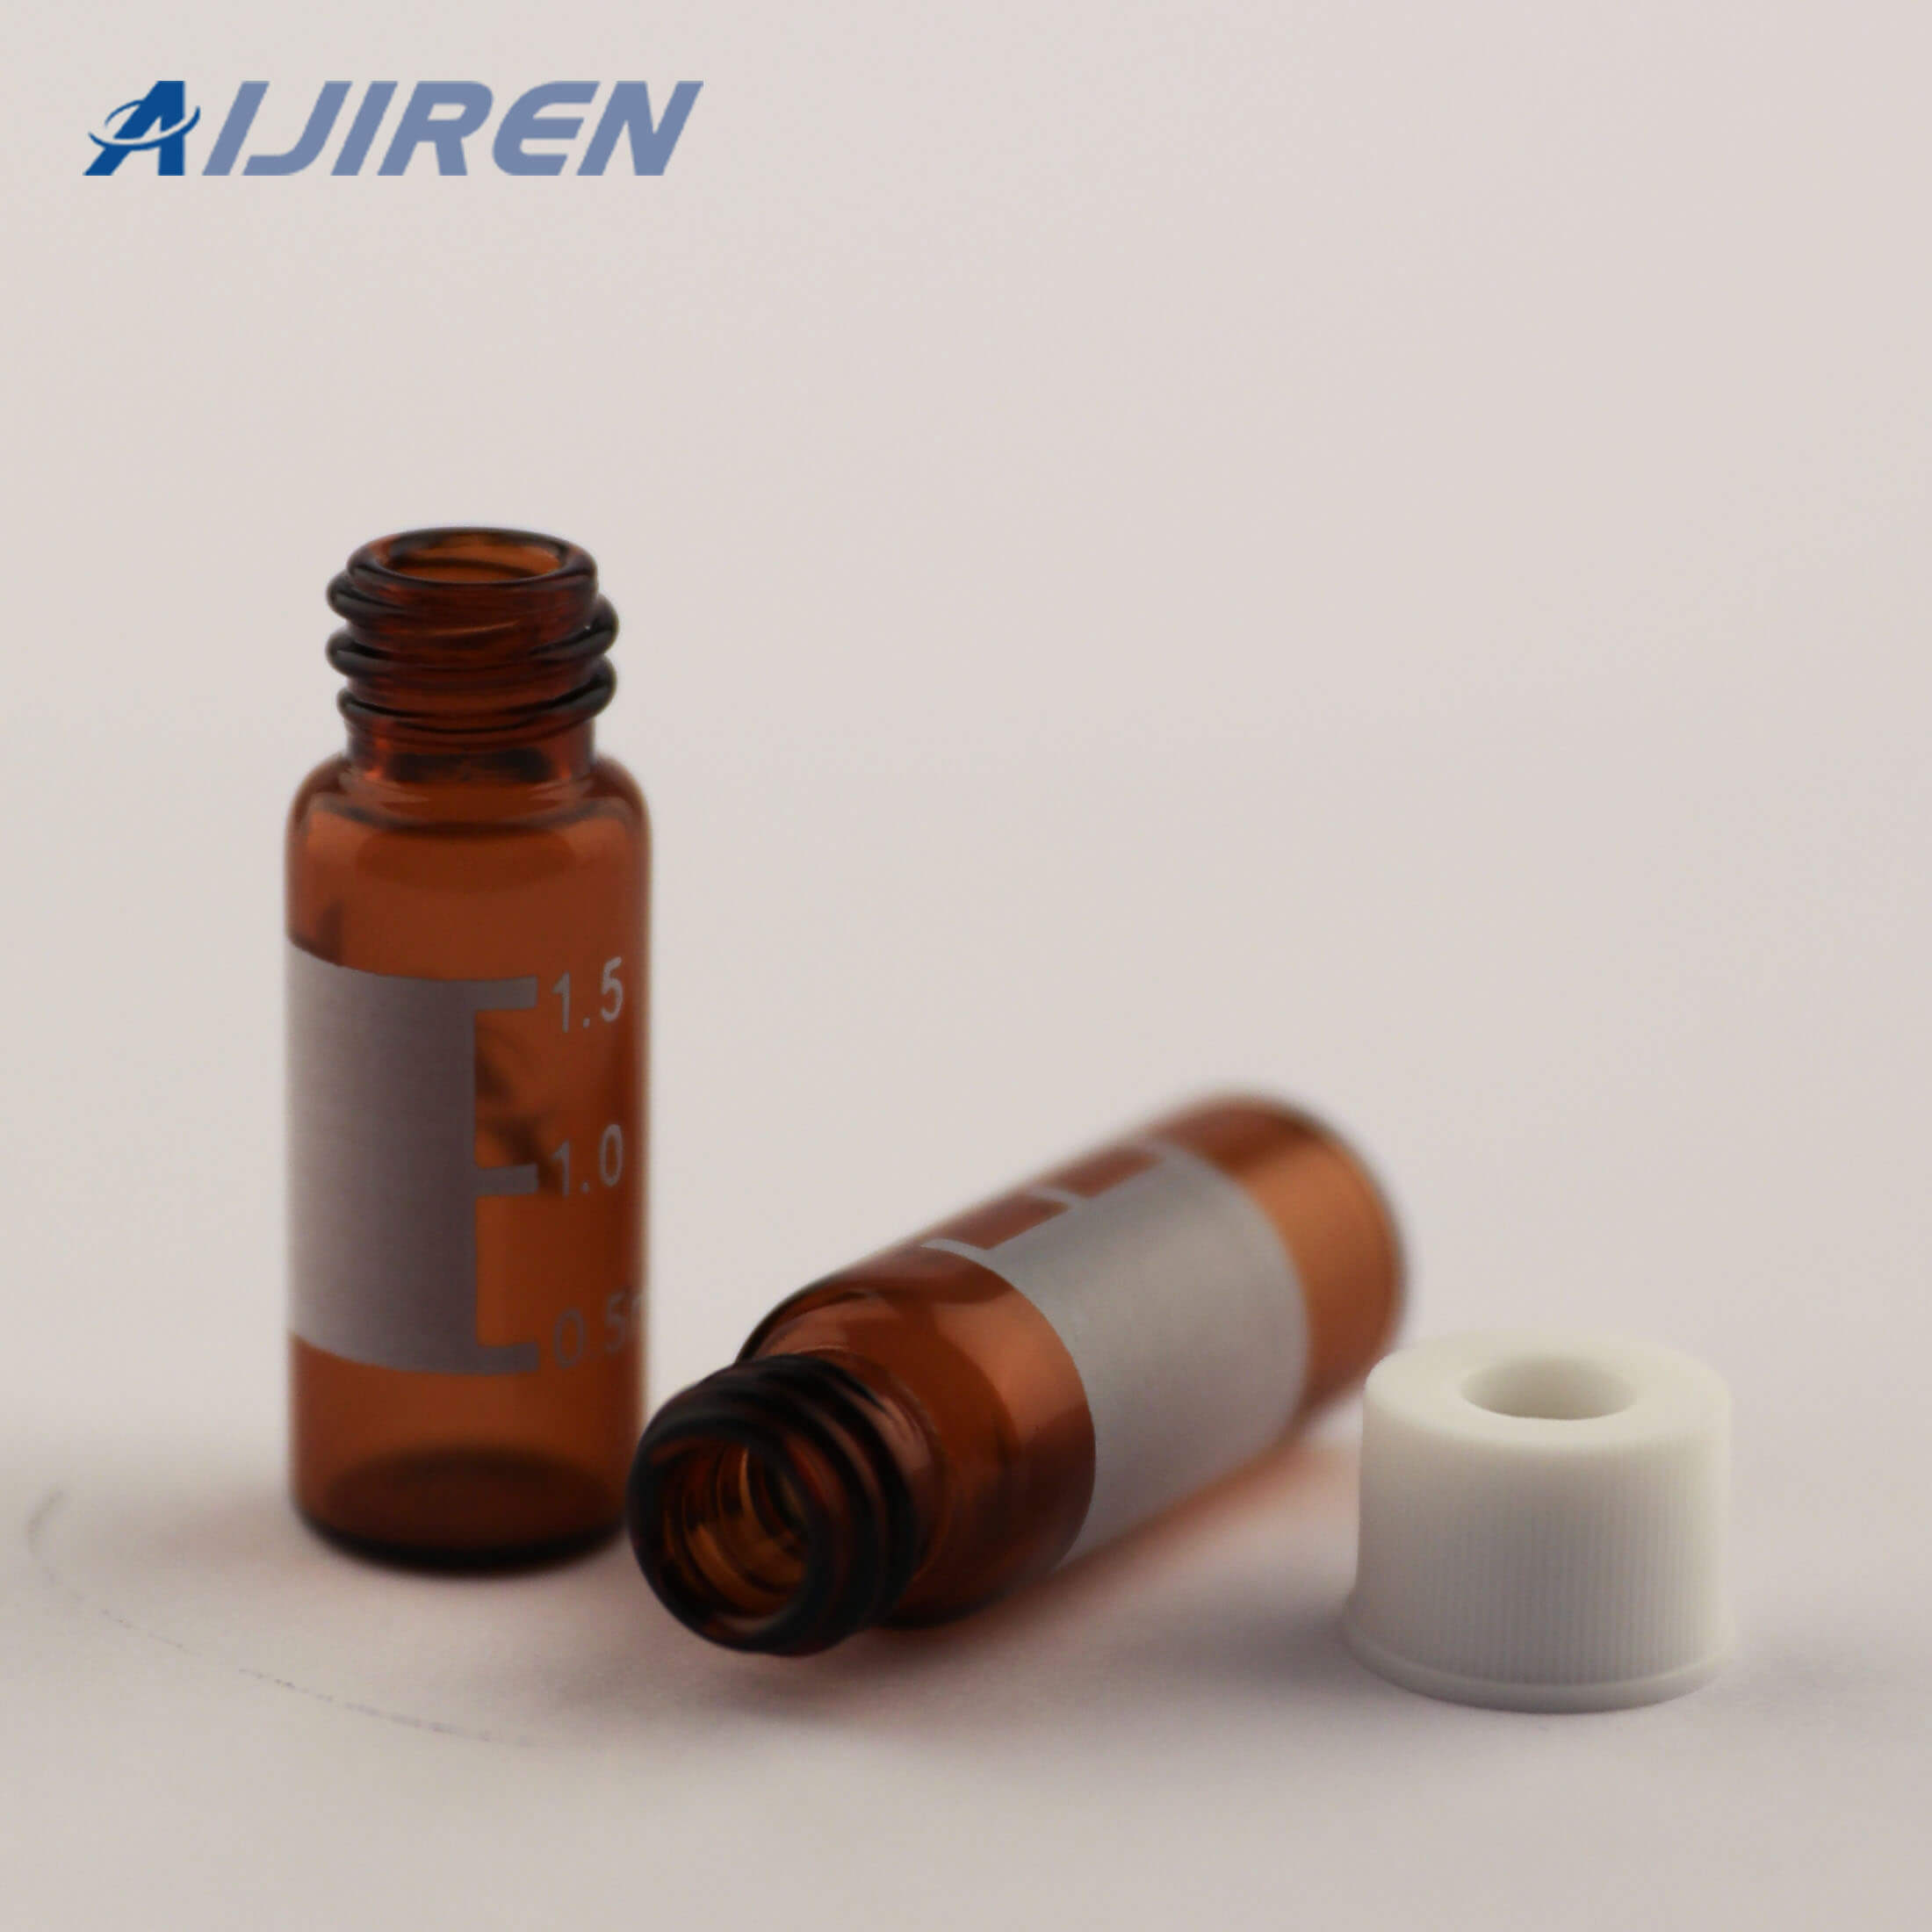 20ml headspace vial8mm Screw Thread HPLC Glass Vial for THERMO FISHER